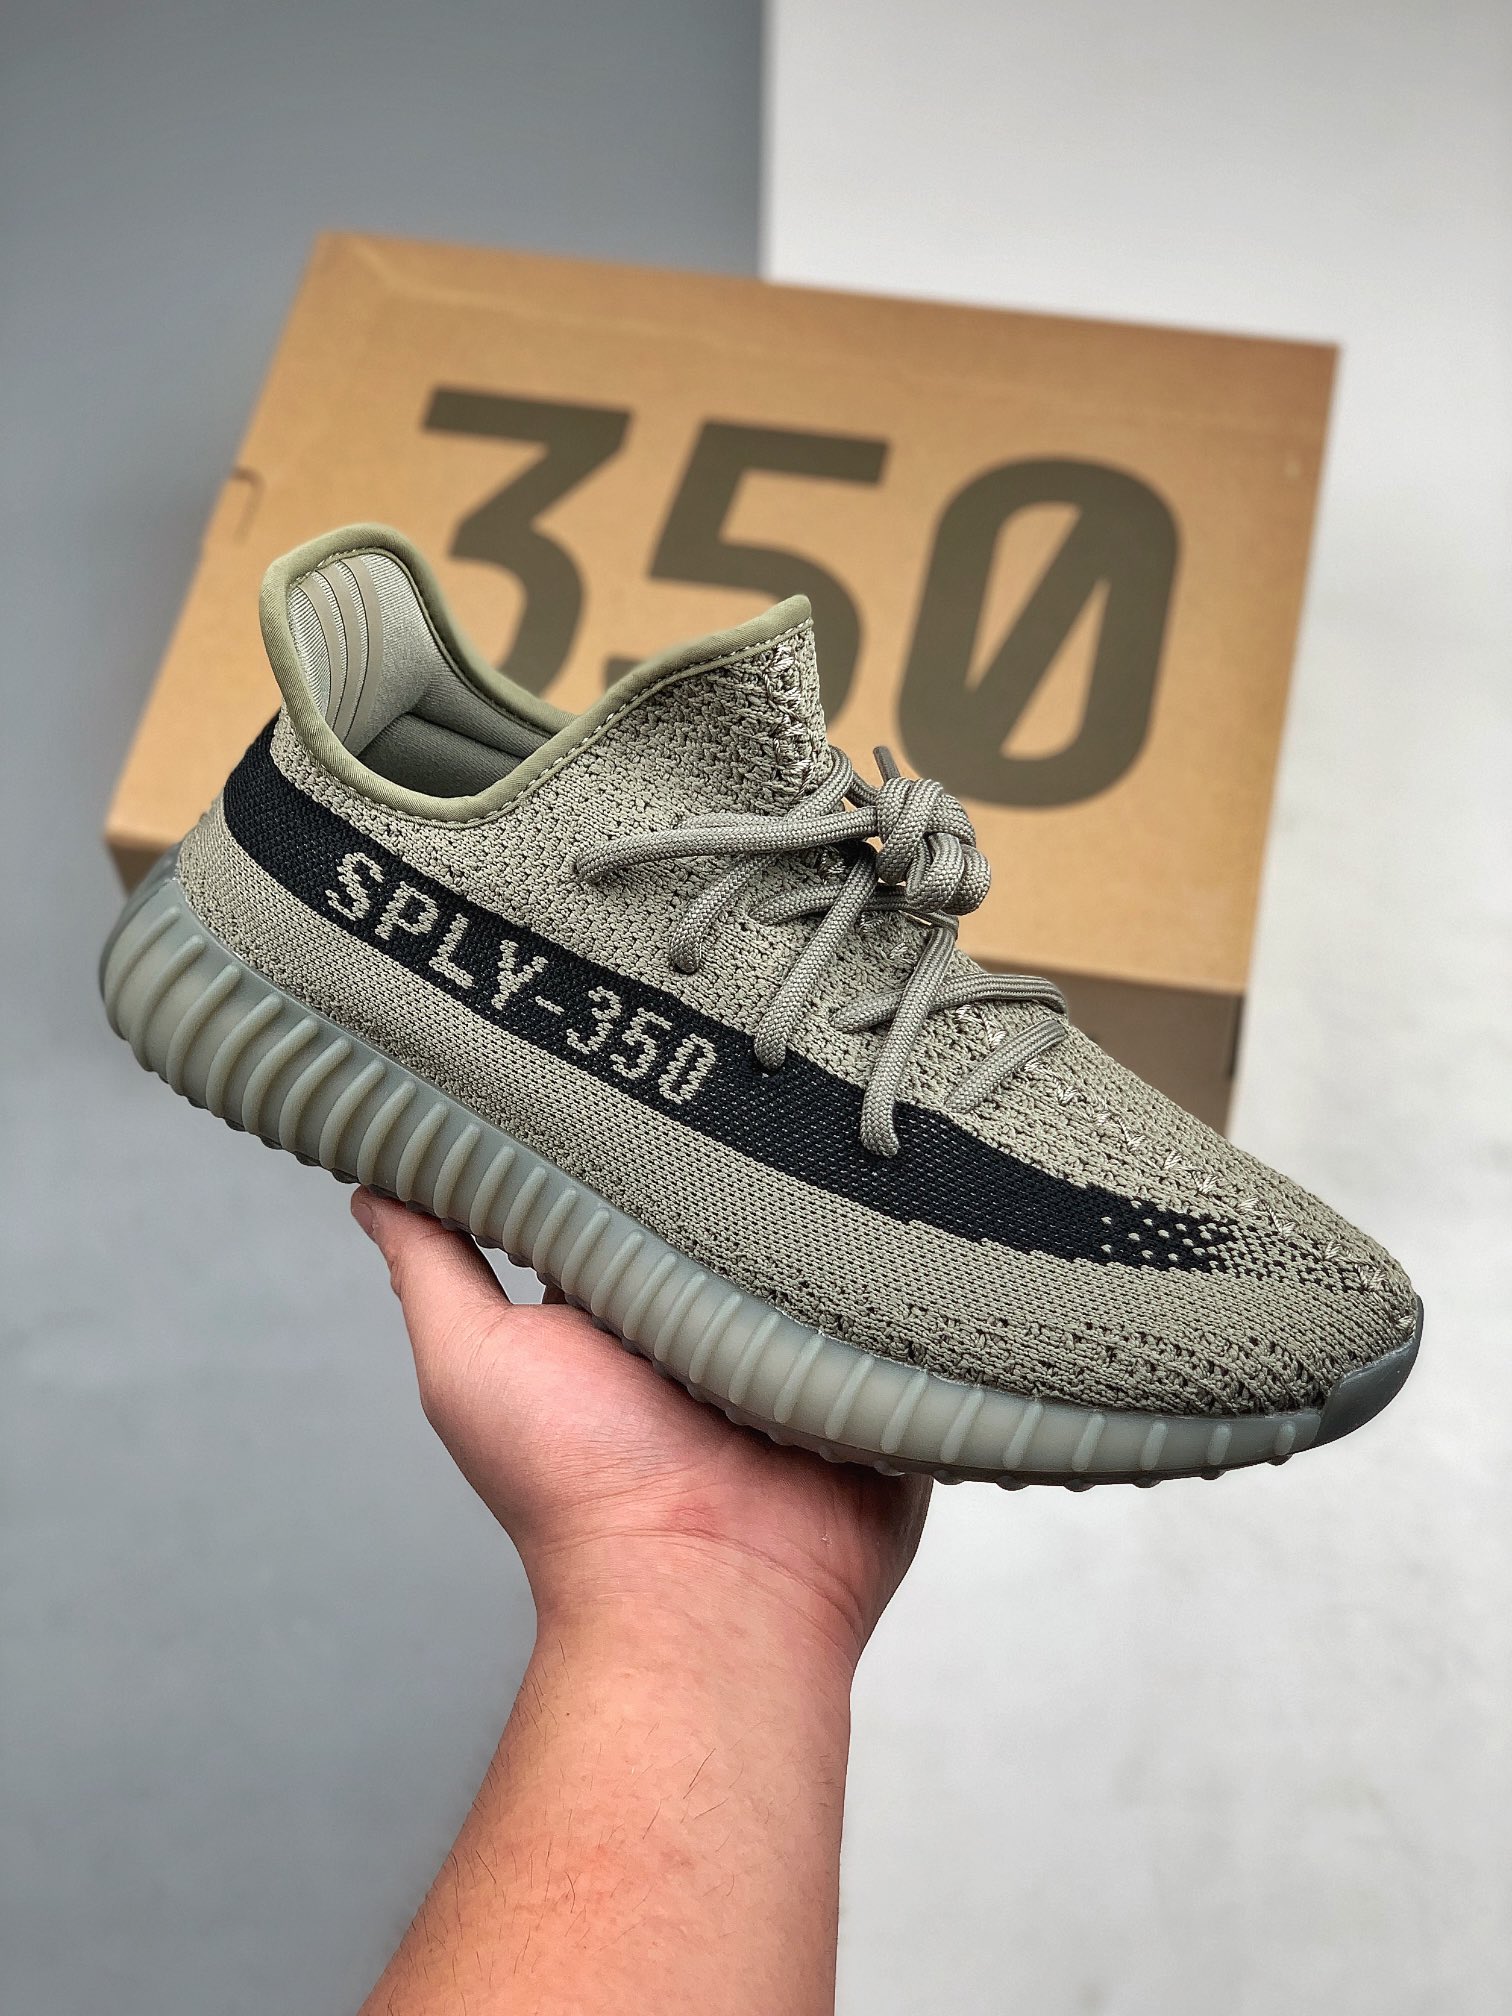 Adidas Yeezy Boost 350 V2 Granite HQ2059 - Premium Quality and Style